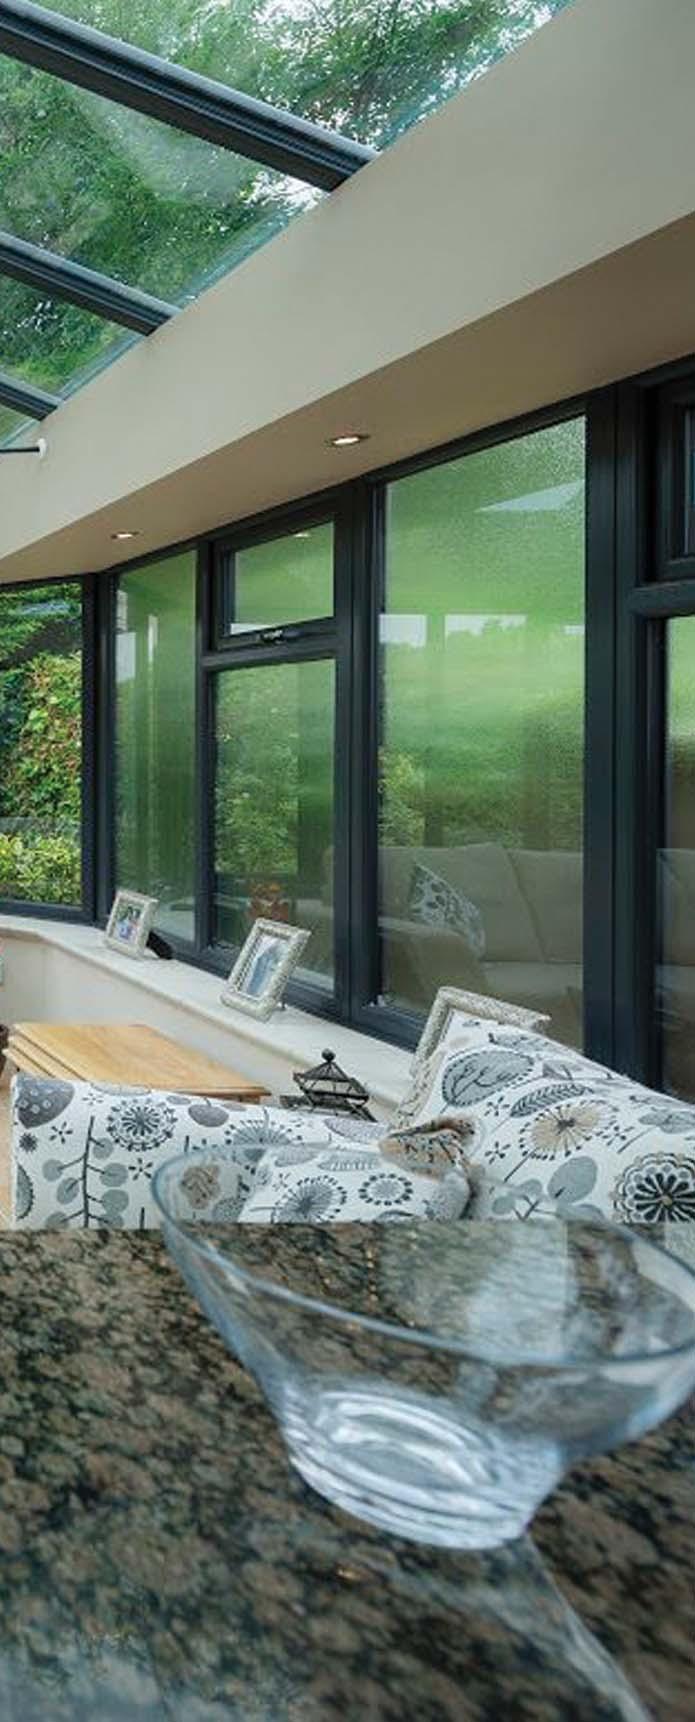 A Designer Conservatory with added style and shape on the outside and a room-like feel on the inside.